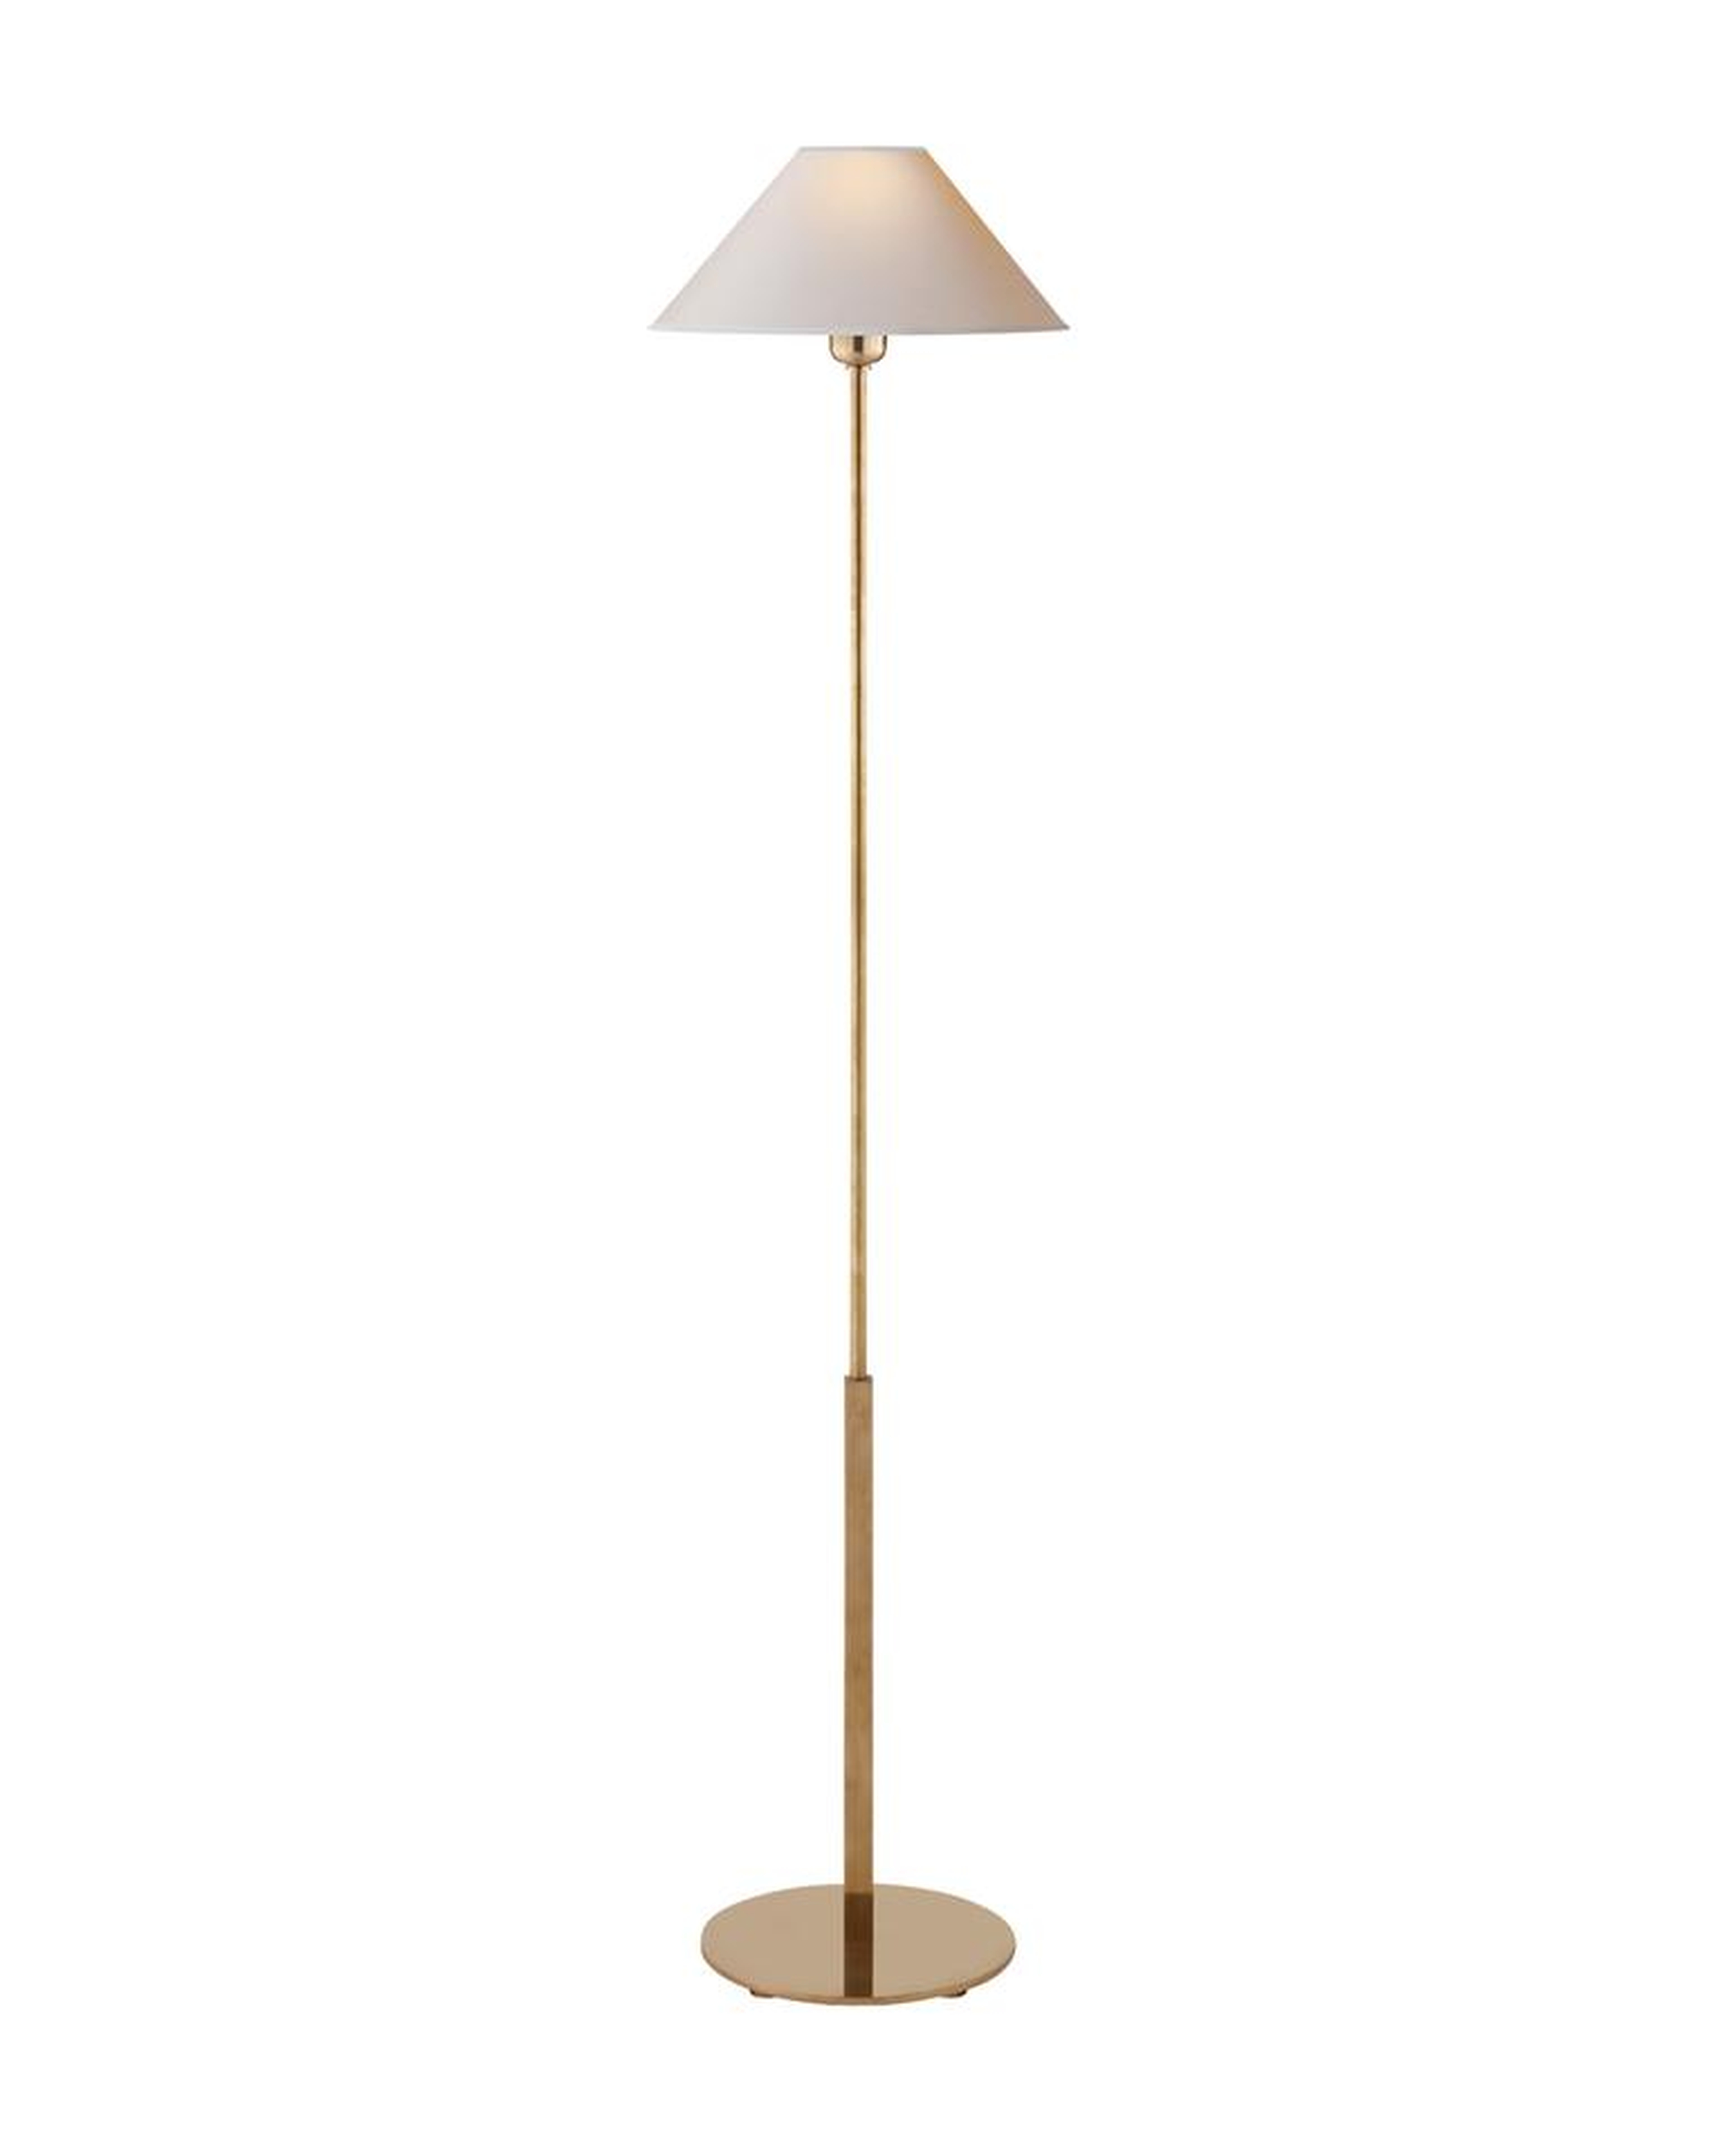 HACKNEY FLOOR LAMP - HAND-RUBBED ANTIQUE BRASS - McGee & Co.